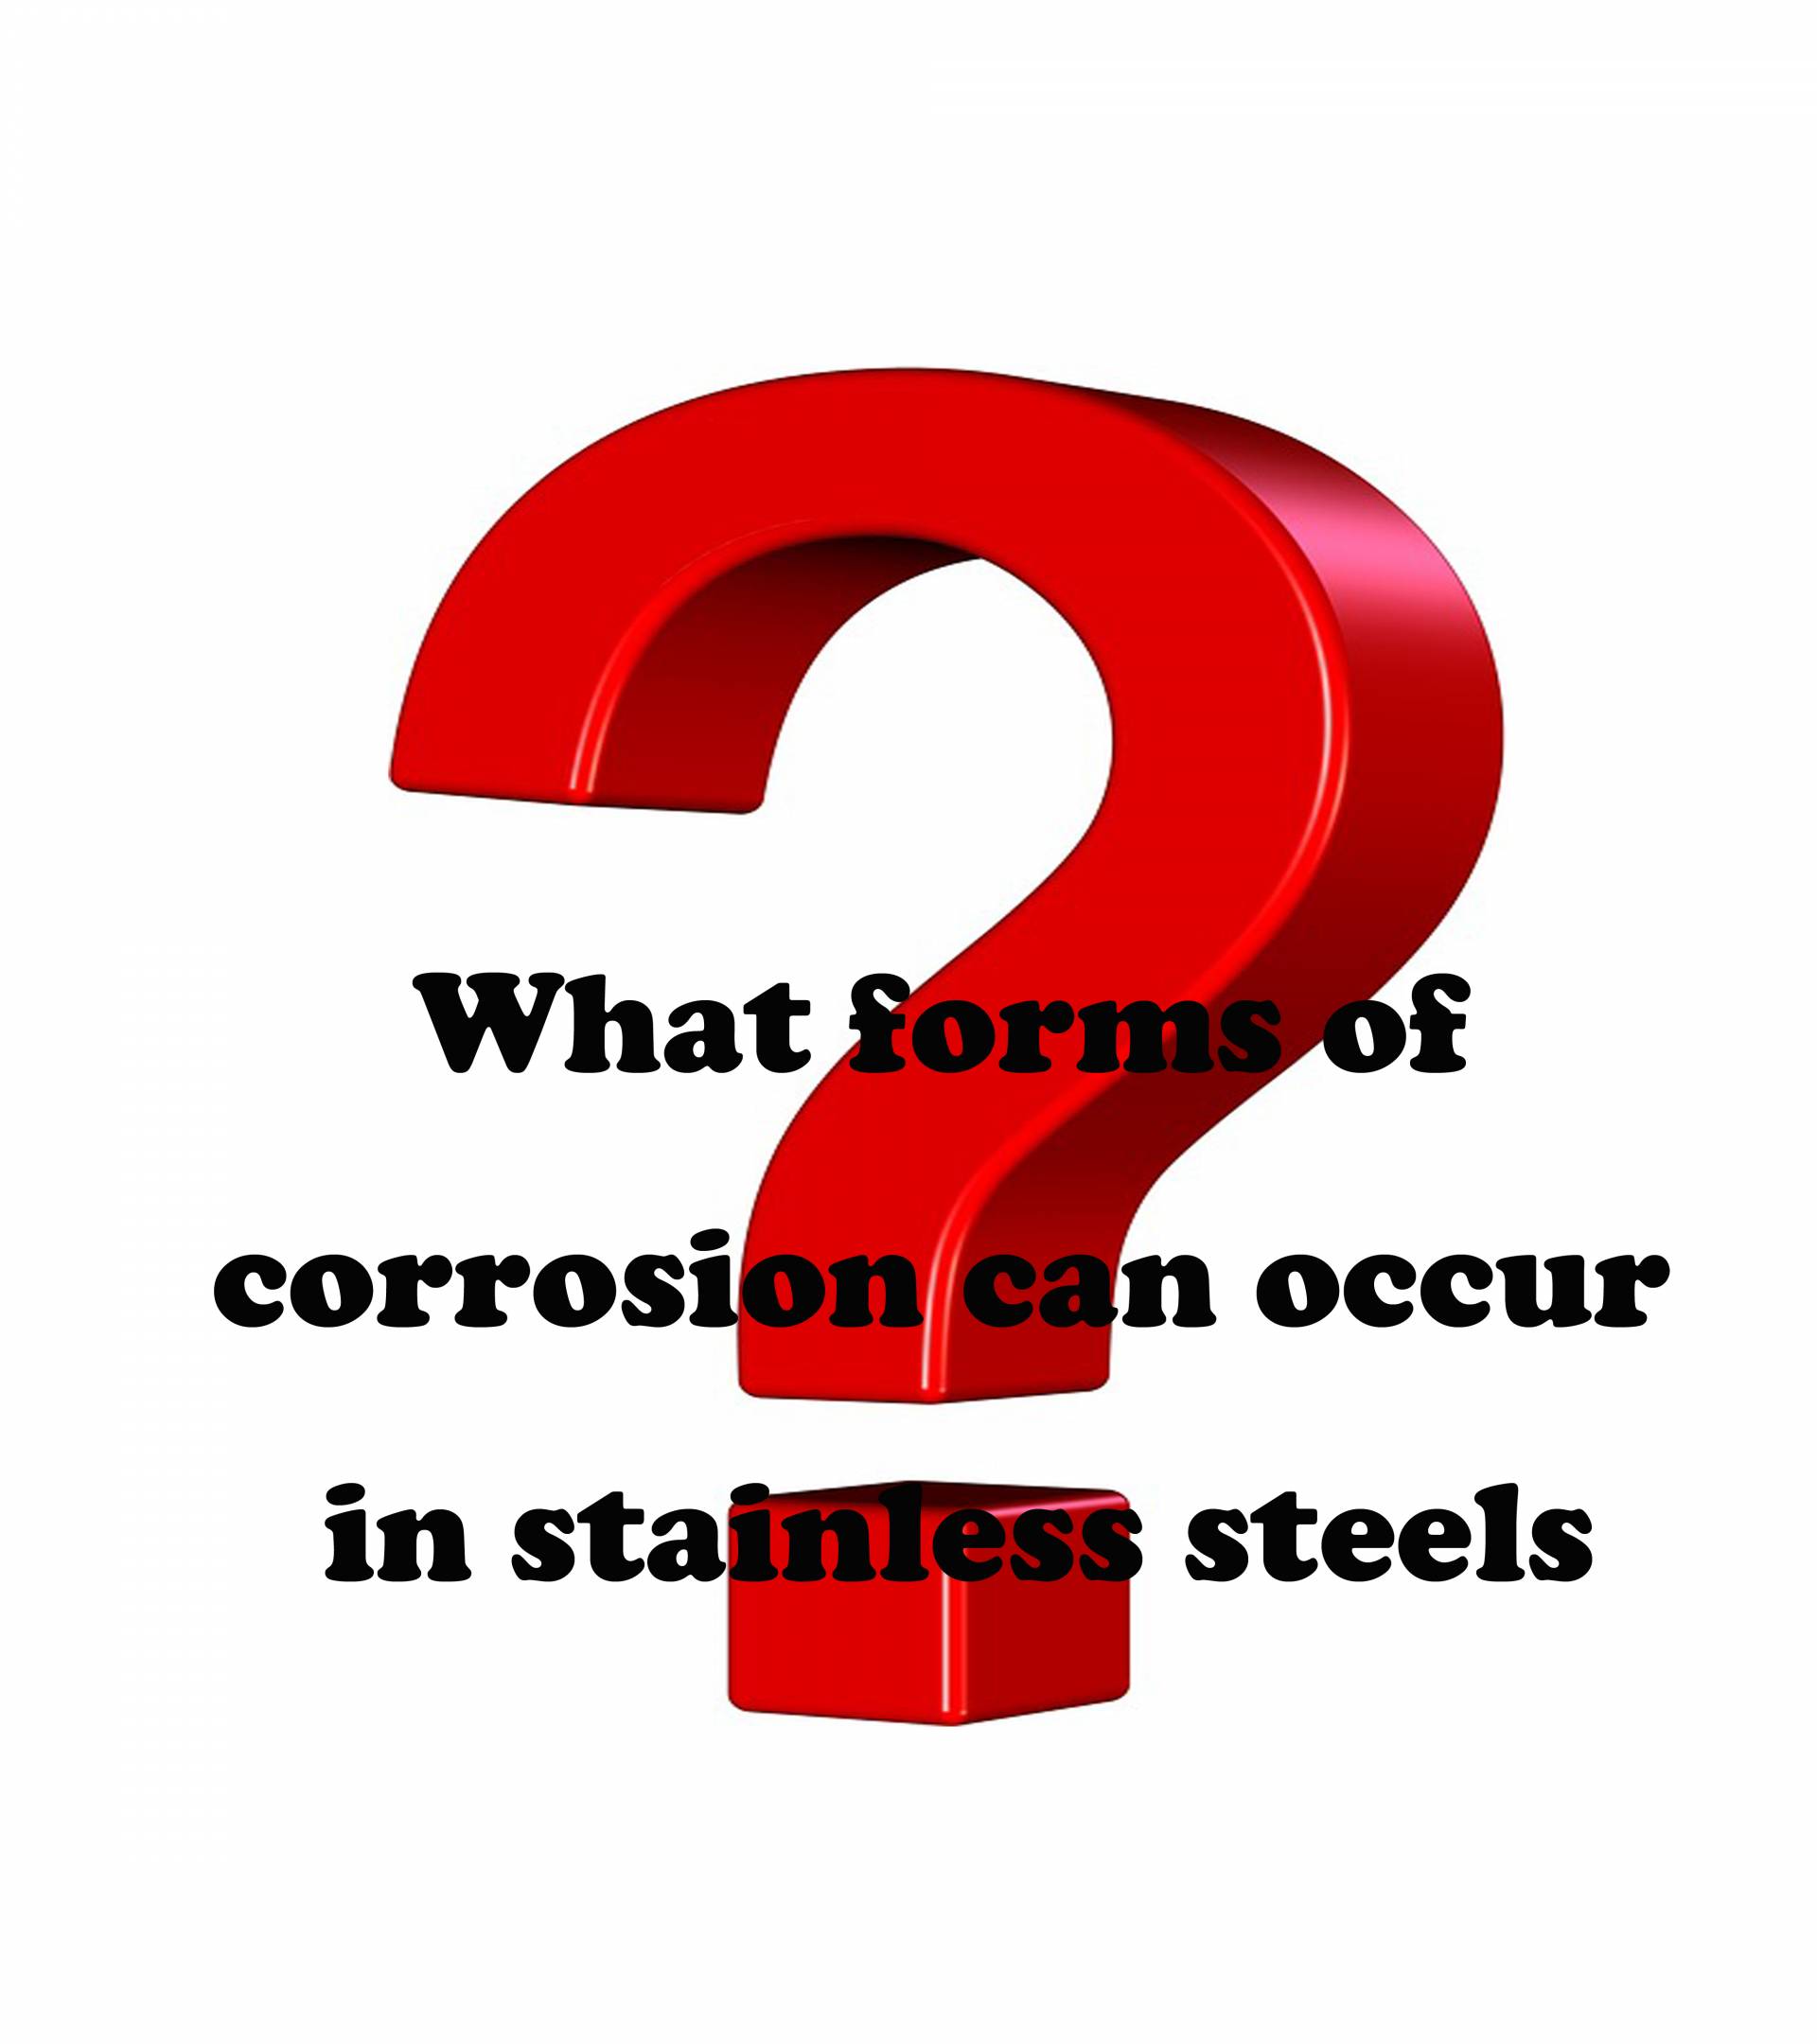 What forms of corrosion can occur in stainless steels?